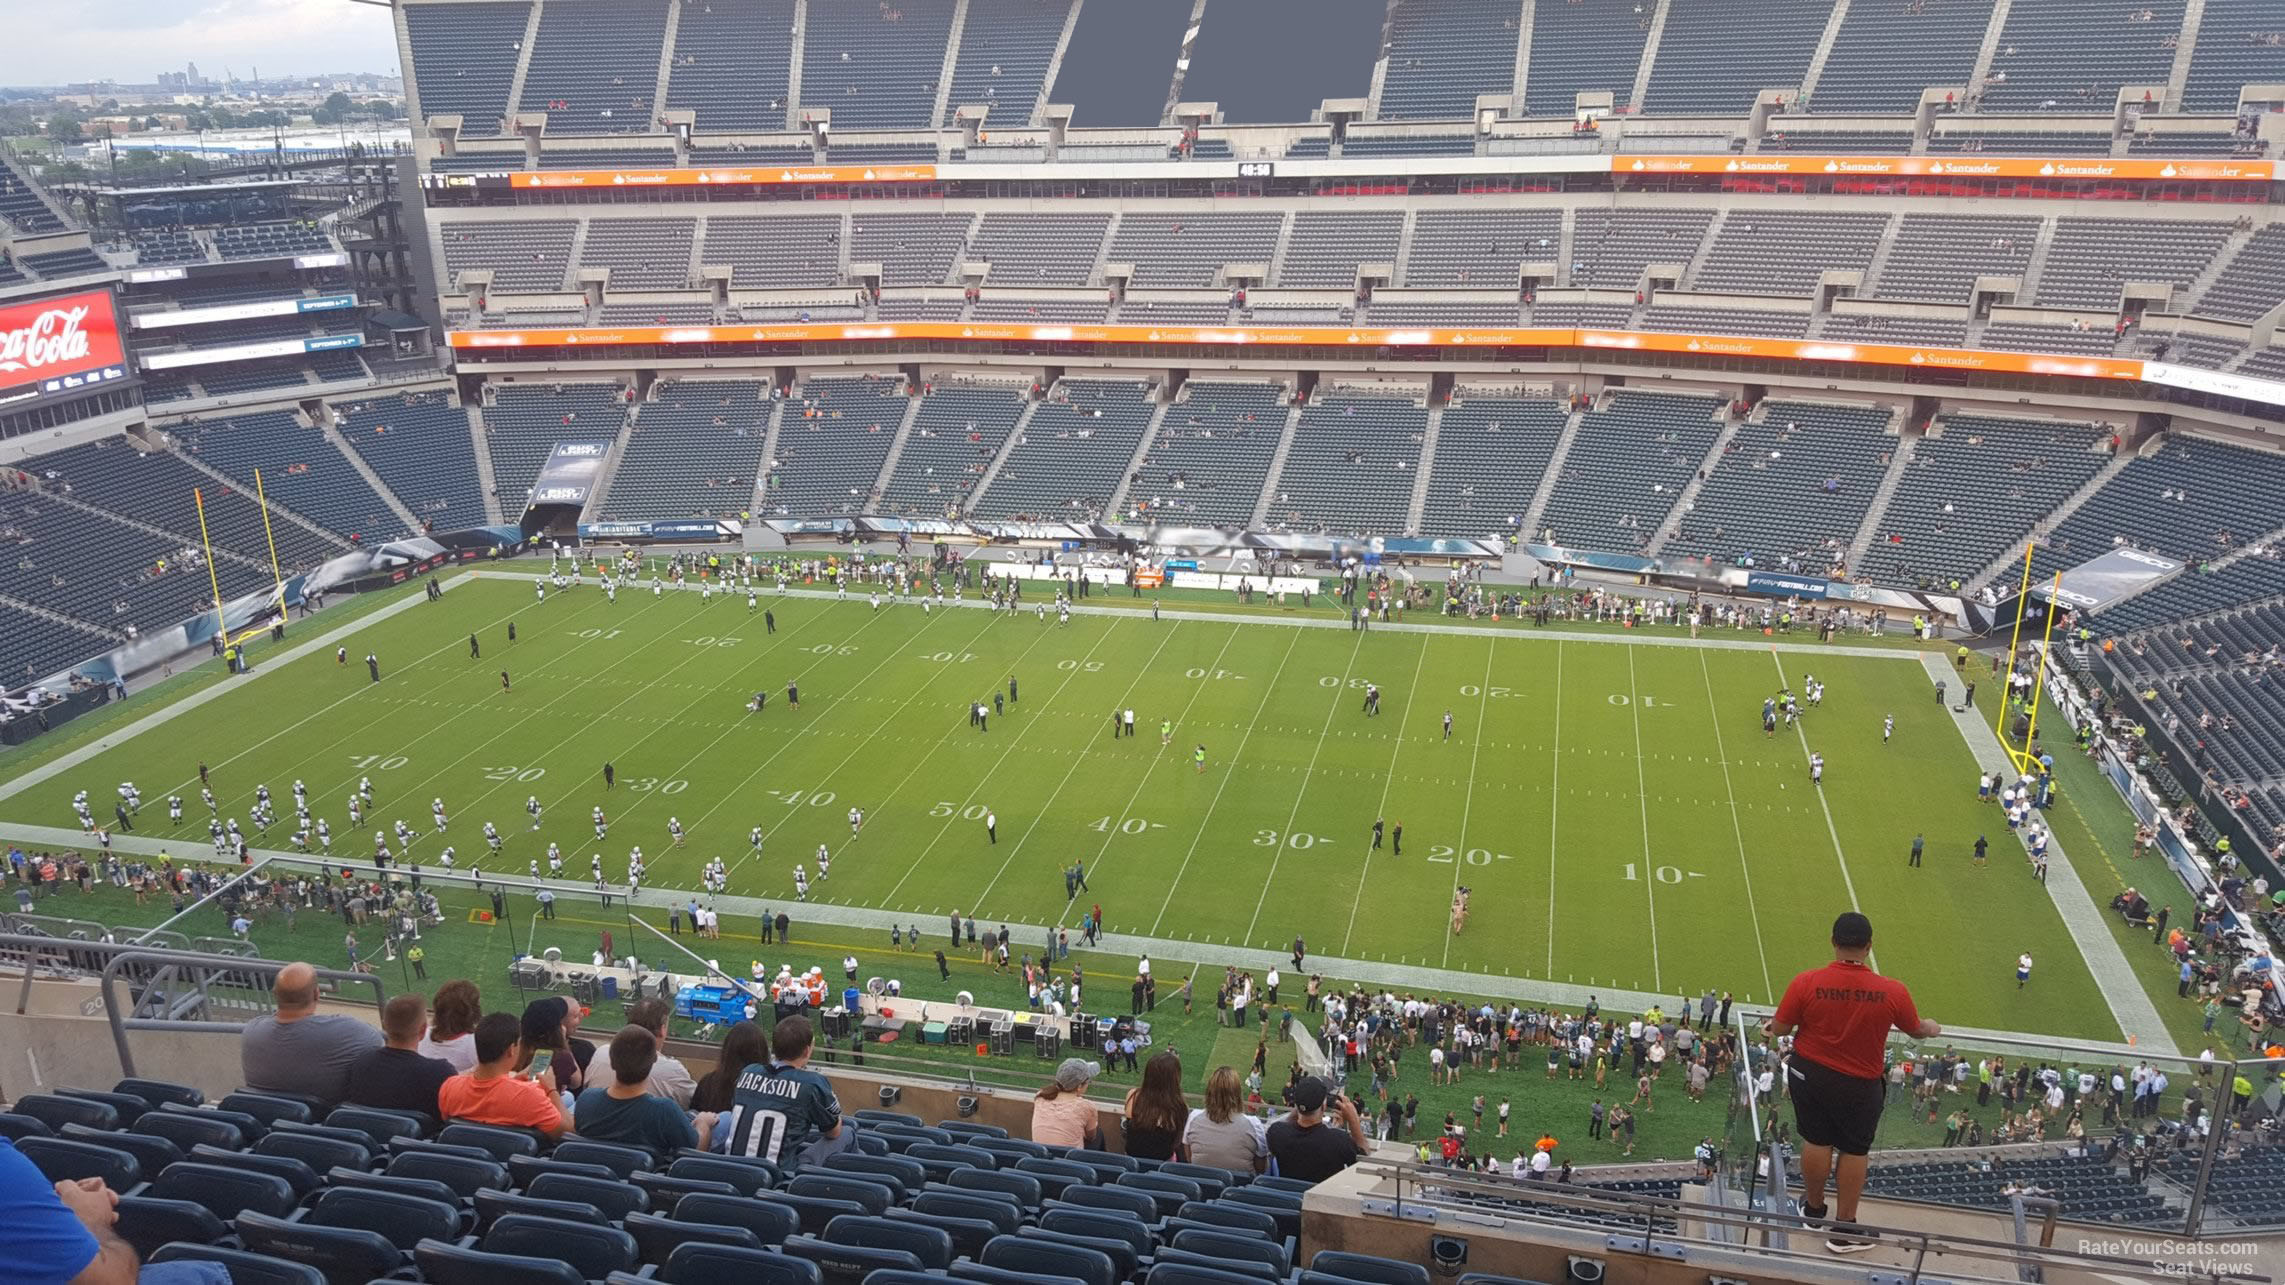 section 203, row 15 seat view  for football - lincoln financial field